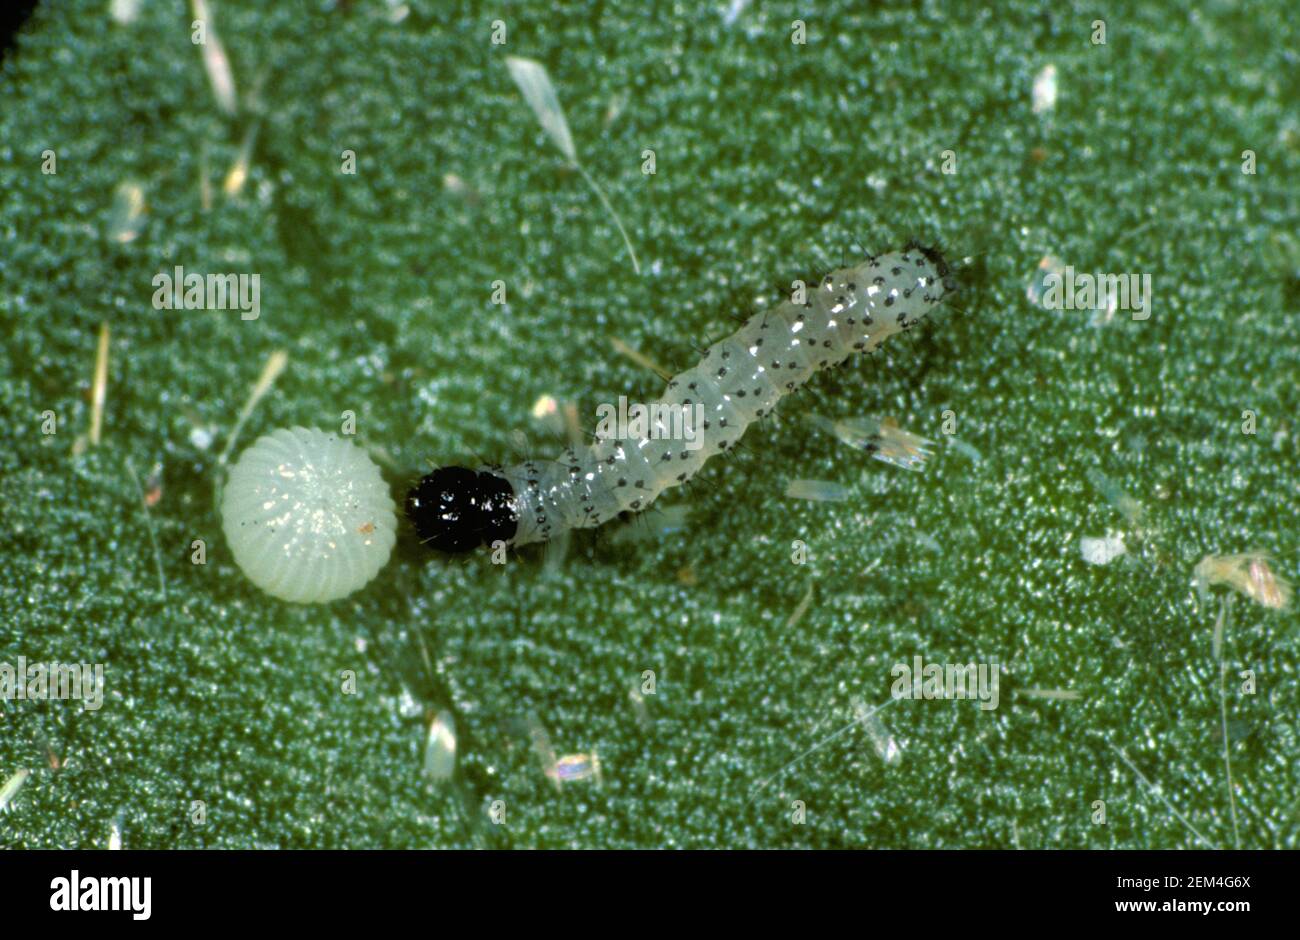 Cotton bollworm, corn earworm or old world bollworm (Helicoverpa armigera) early instar caterpillar on a leaf Stock Photo